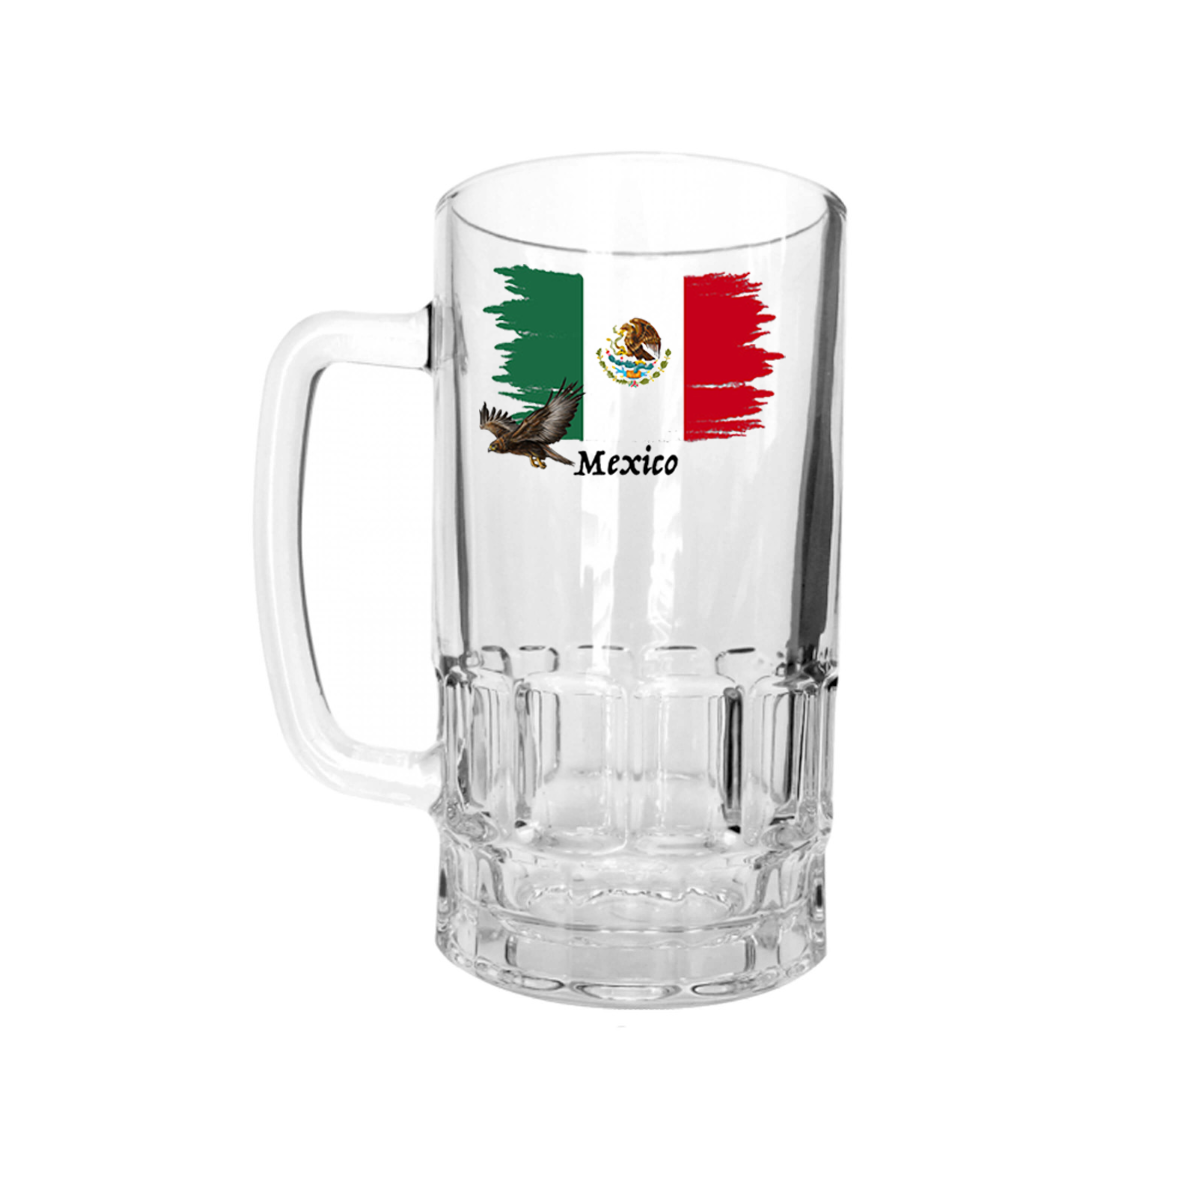 AGAD Turista (I Love Mexico Glass Beer Stein)